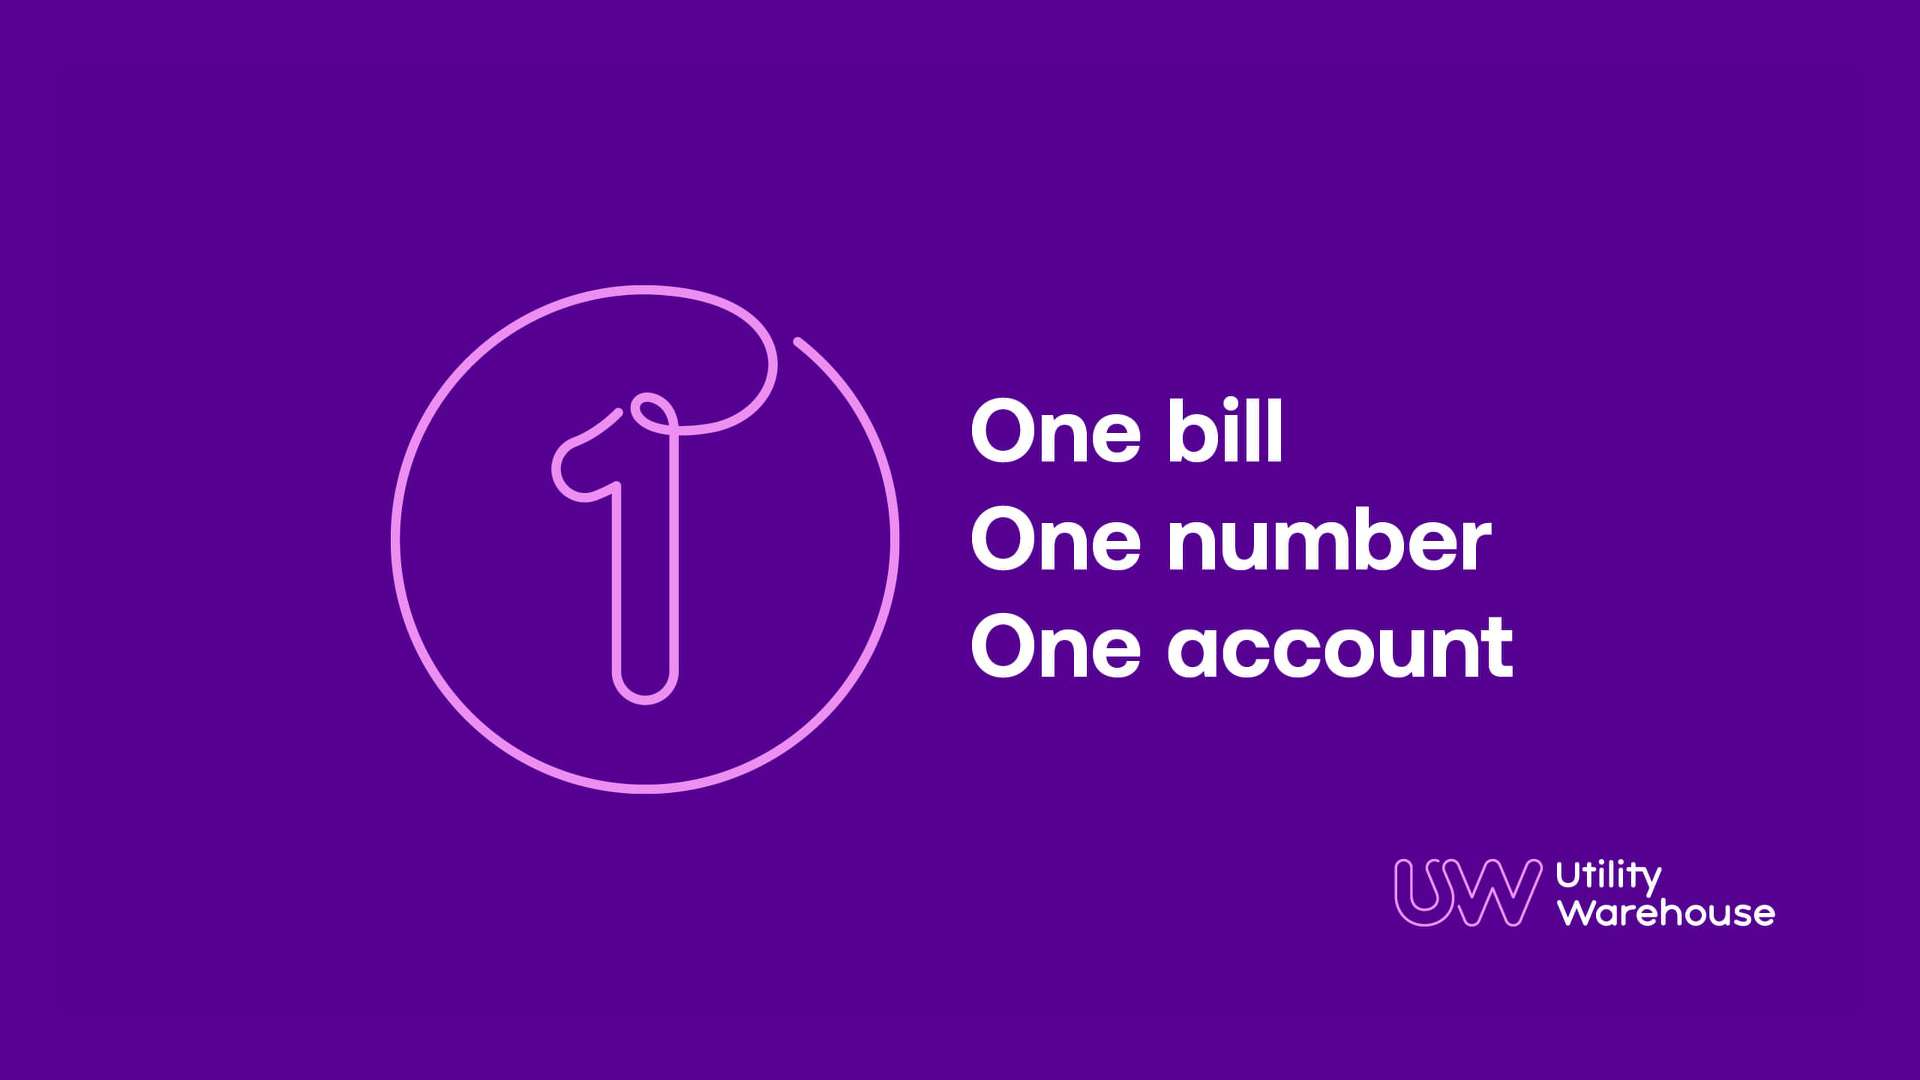 Simplify your bills with Utility Warehouse services